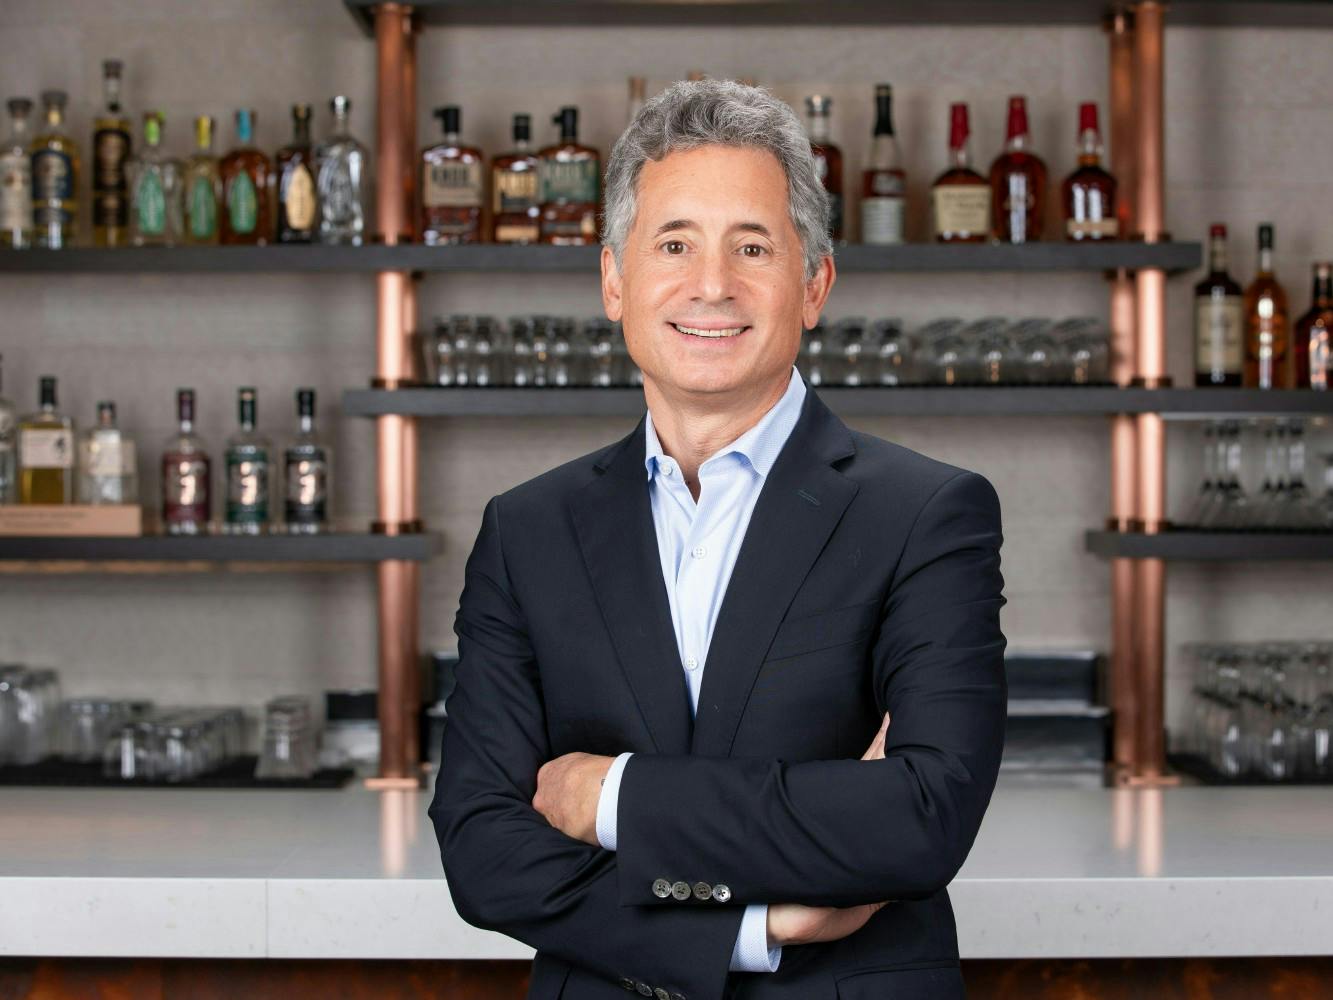 Portrait of Beam Suntory President and CEO Albert Baladi posing in front of a bar while wearing a suit.